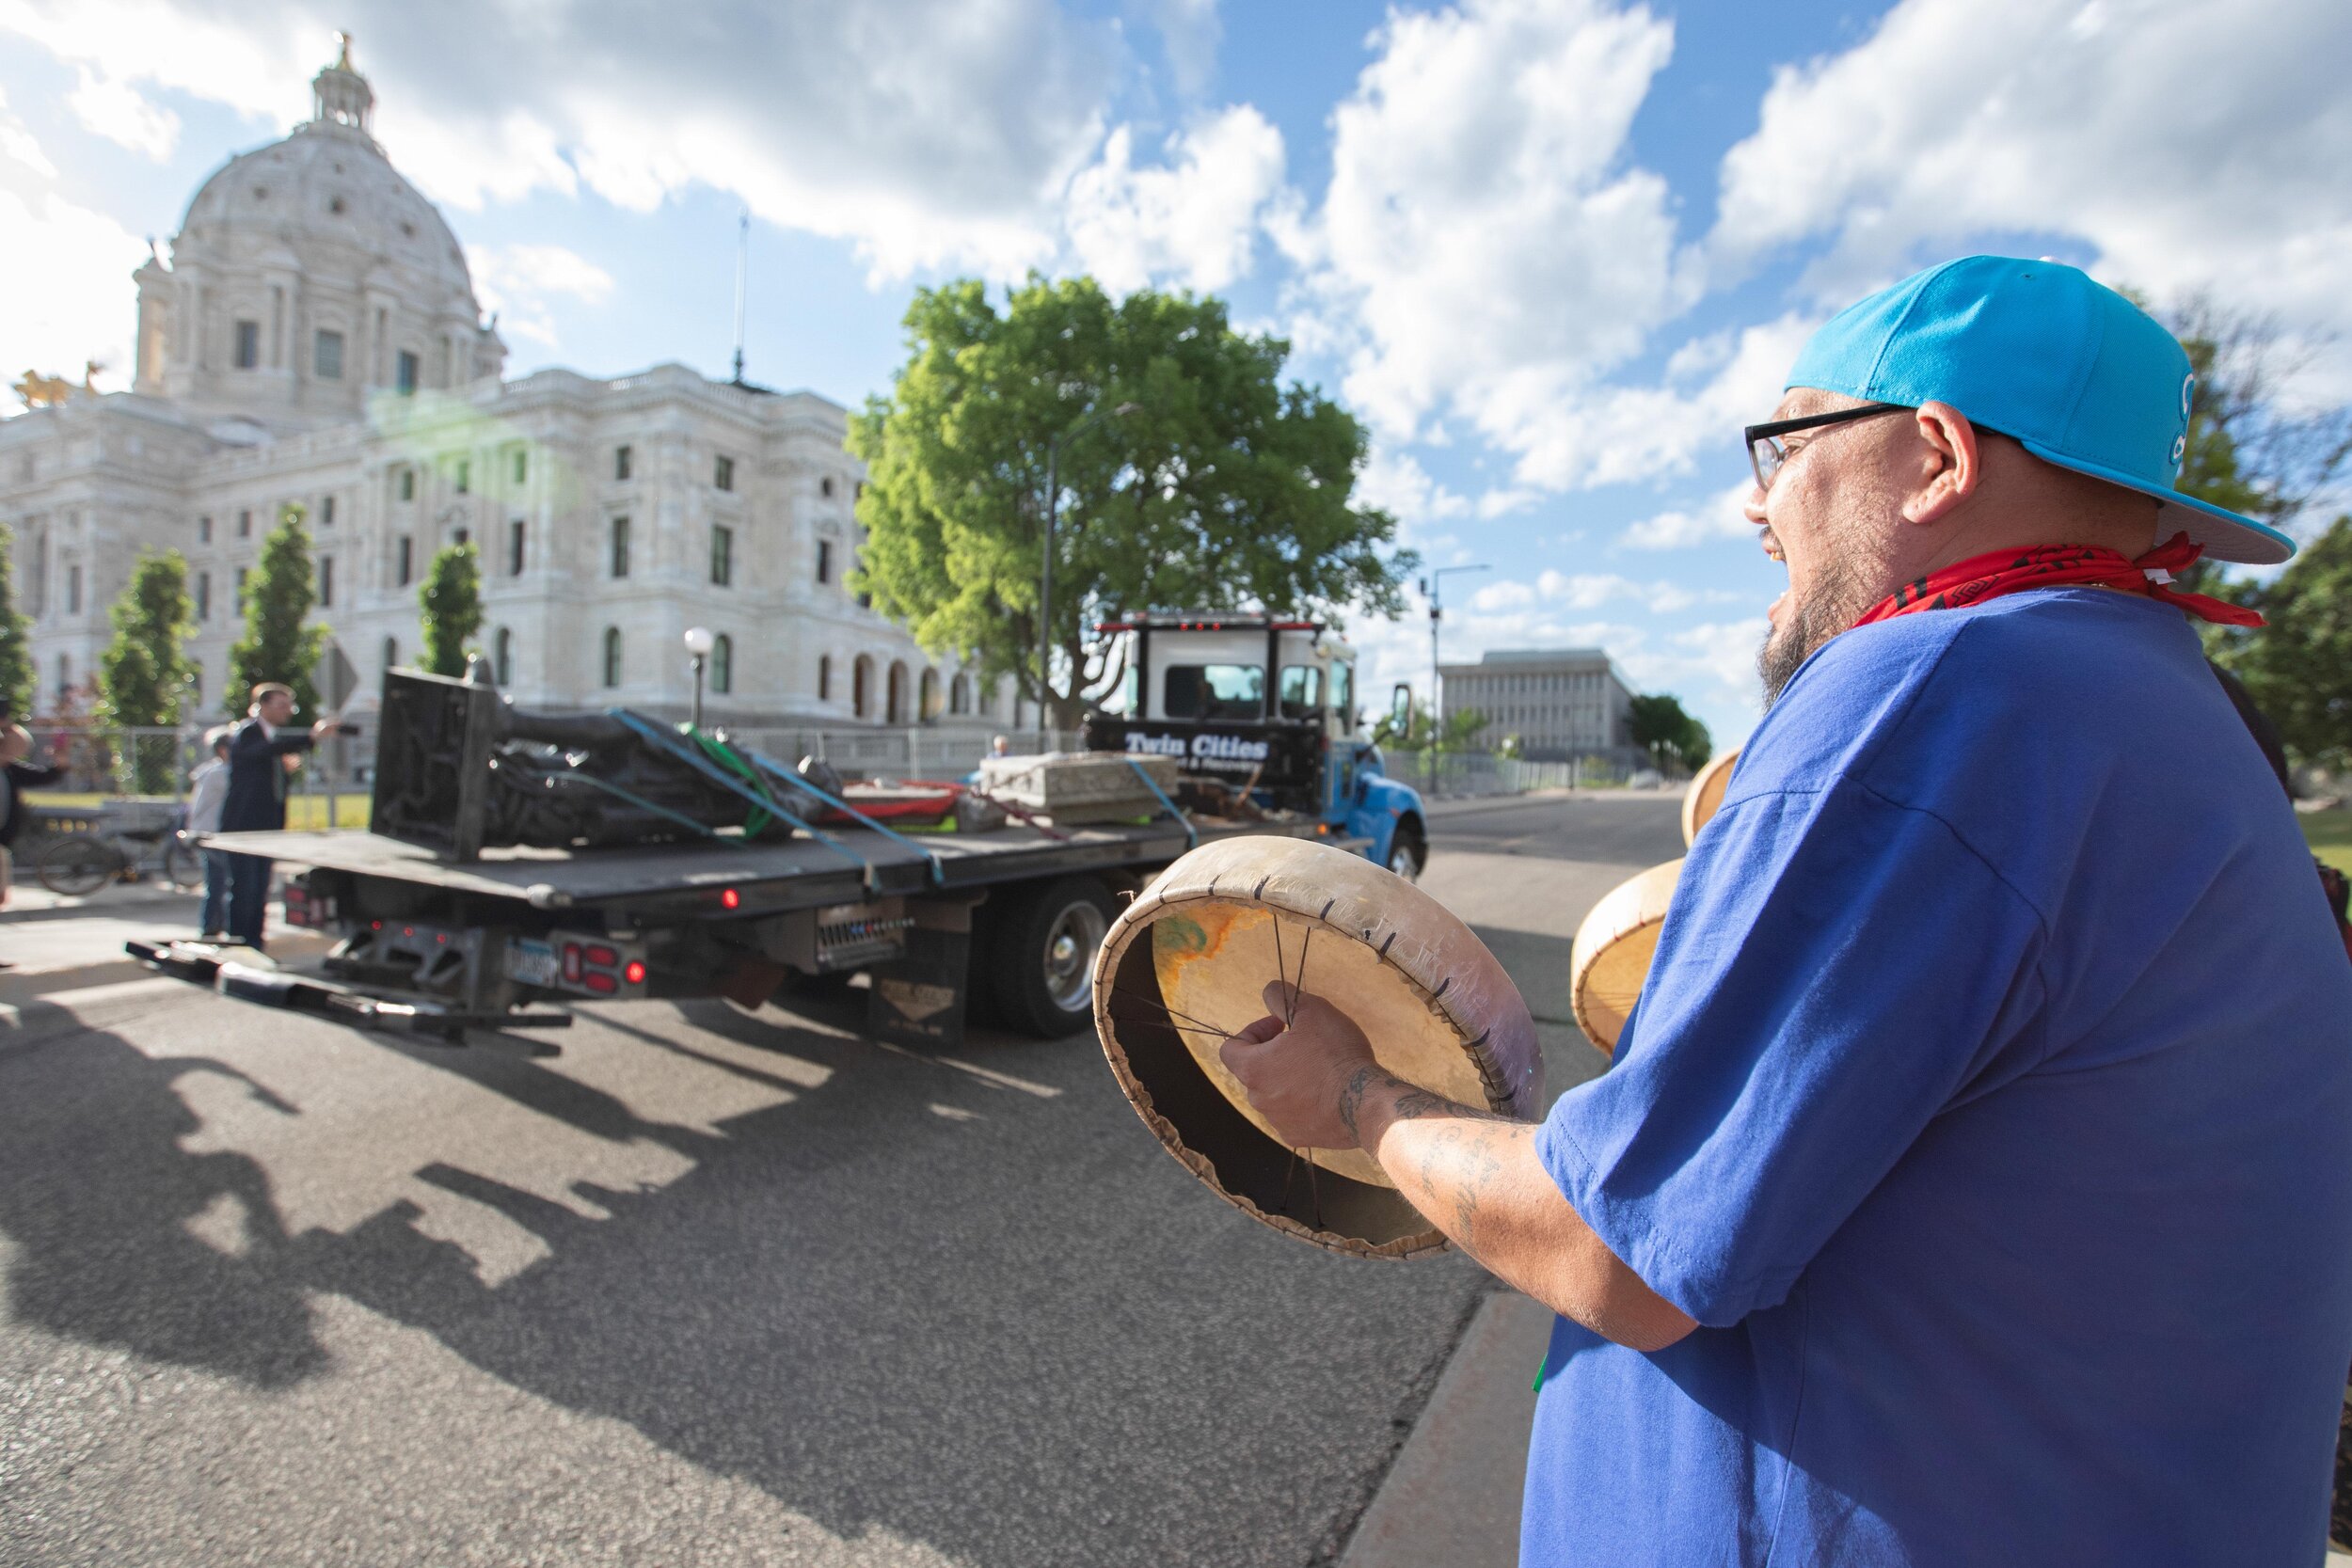  Native American activists beat drums and chant as the statue of Christopher Columbus goes by on a flatbed after it was torn down on the grounds of the State Capitol on Jun 10, 2020. 